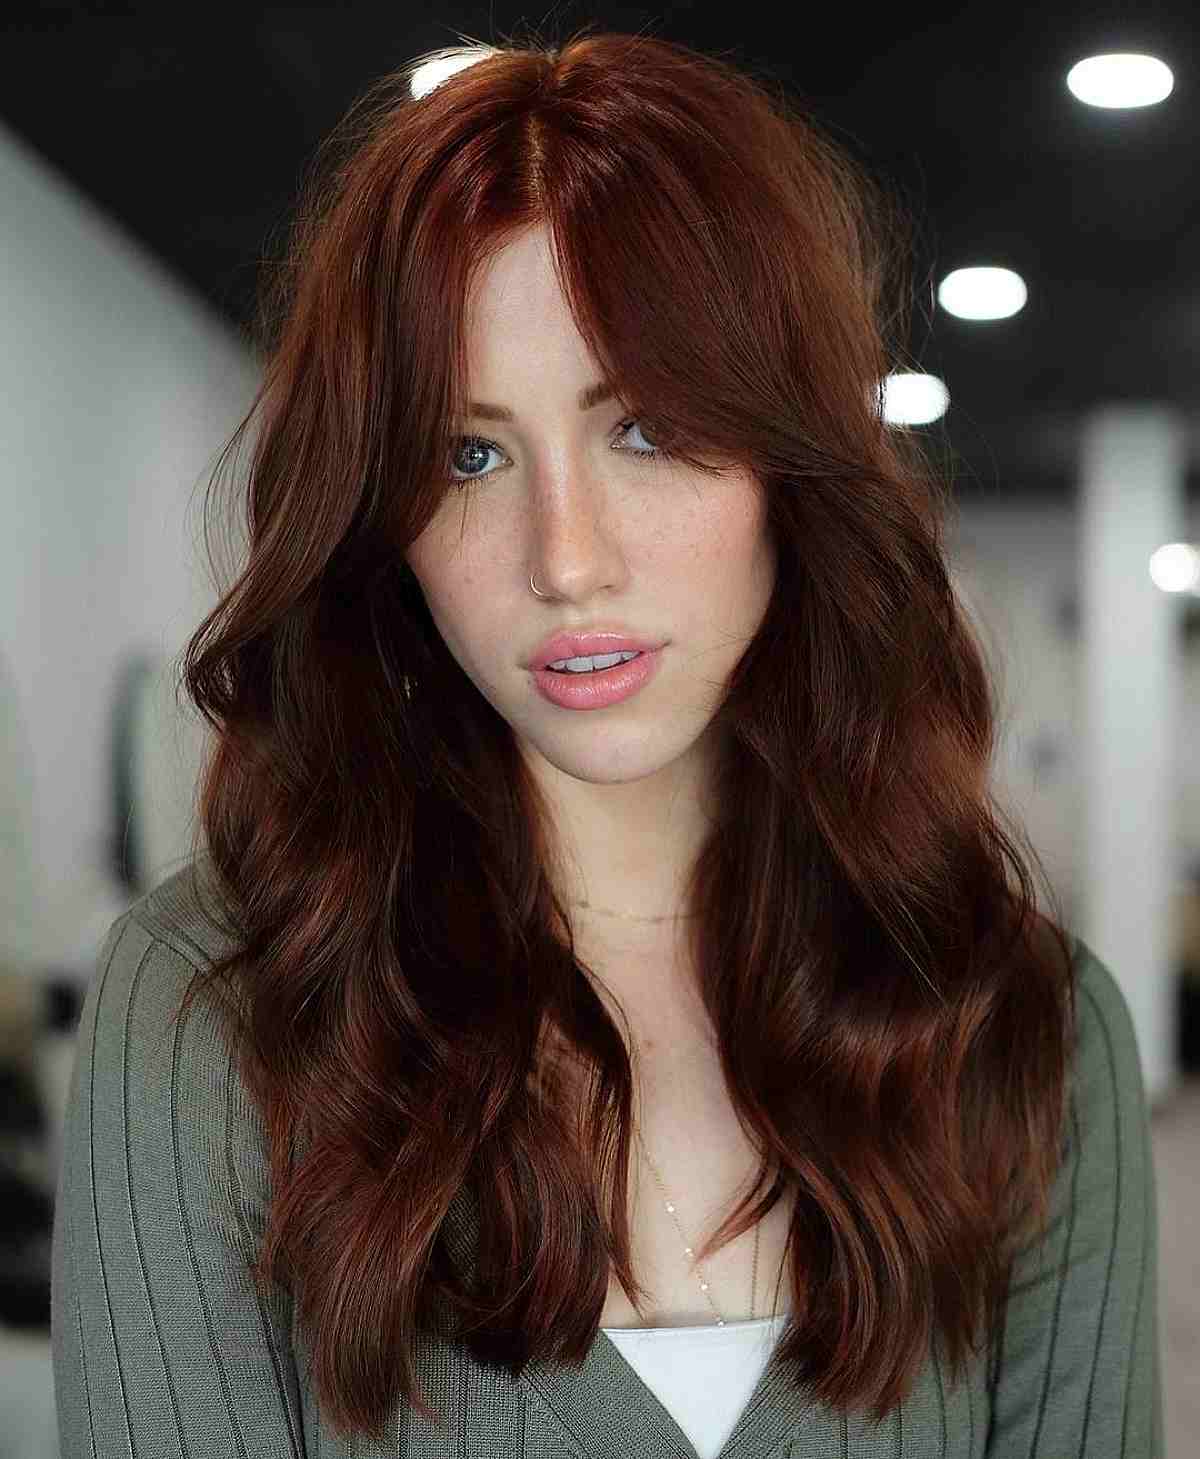 Deep Red Wavy Hair with Bardot Bangs for a Long Face